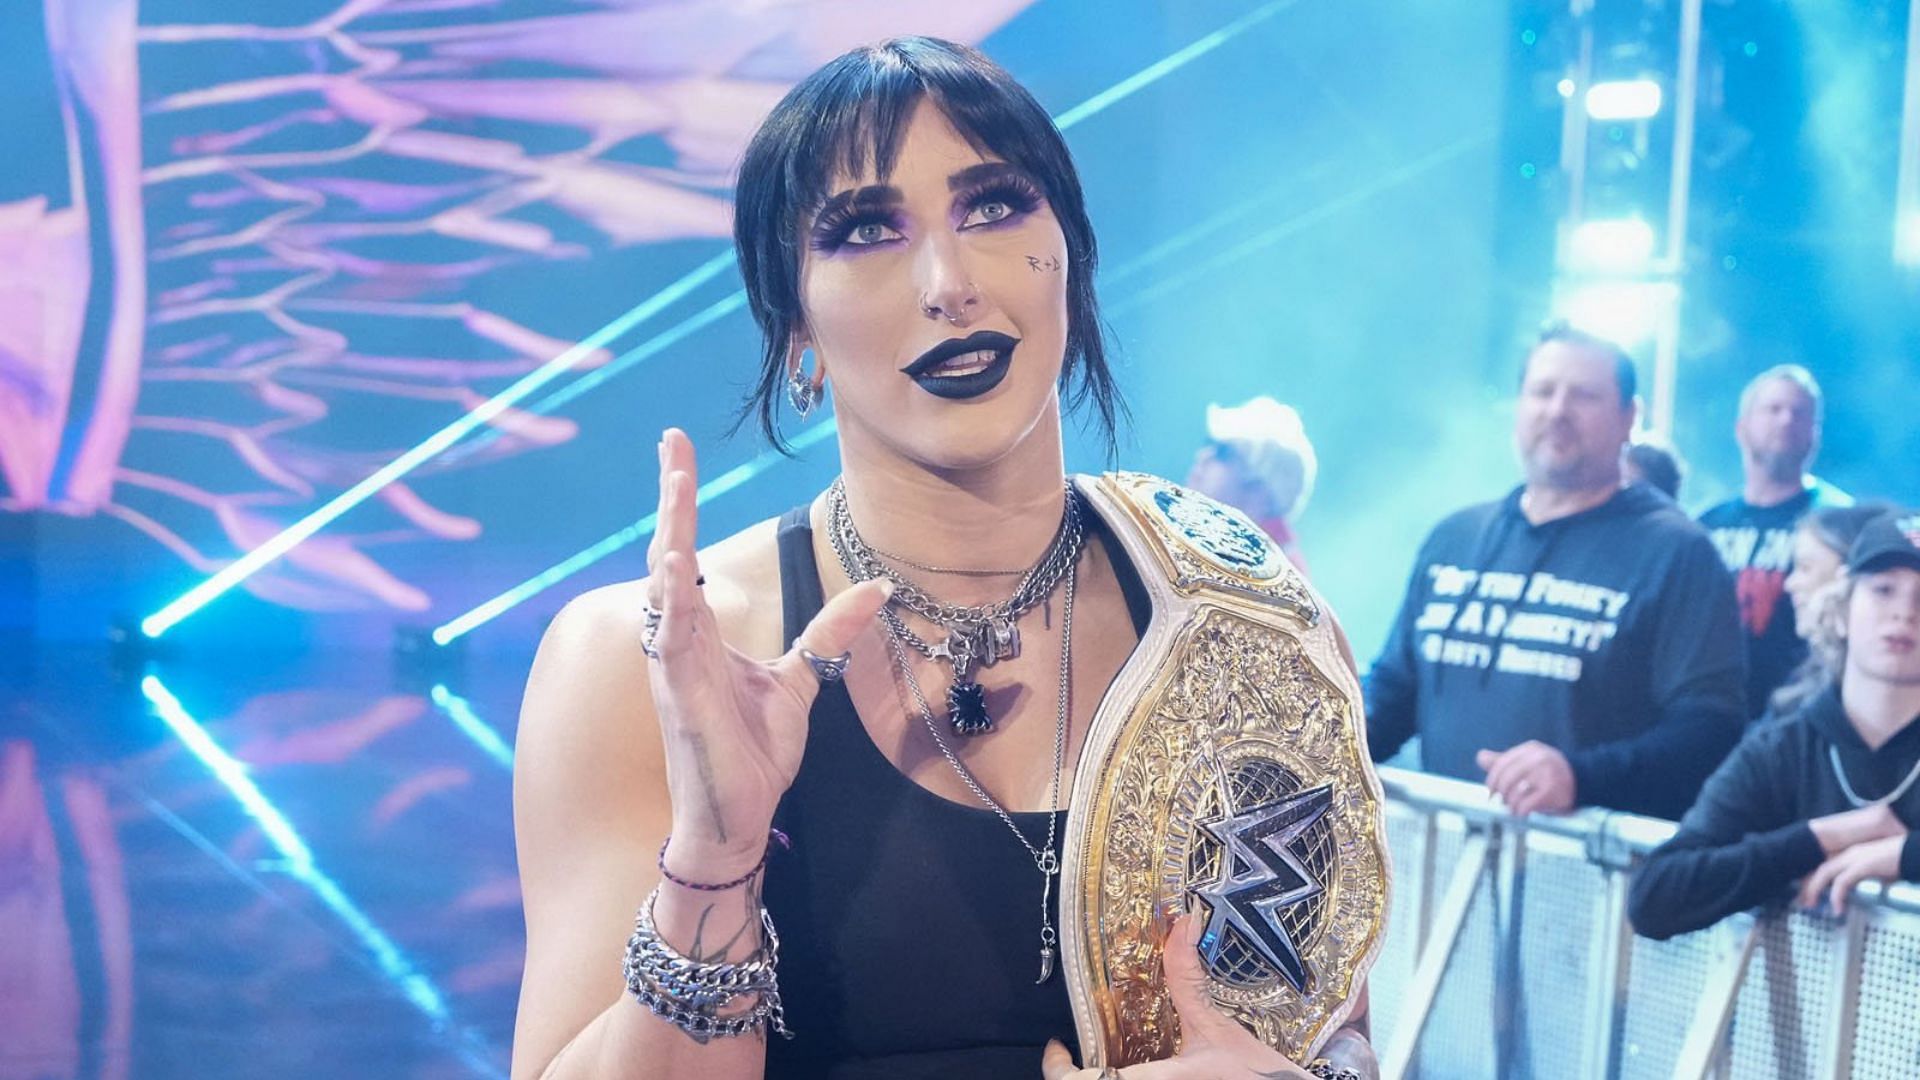 Rhea Ripley is a member of The Judgment Day.